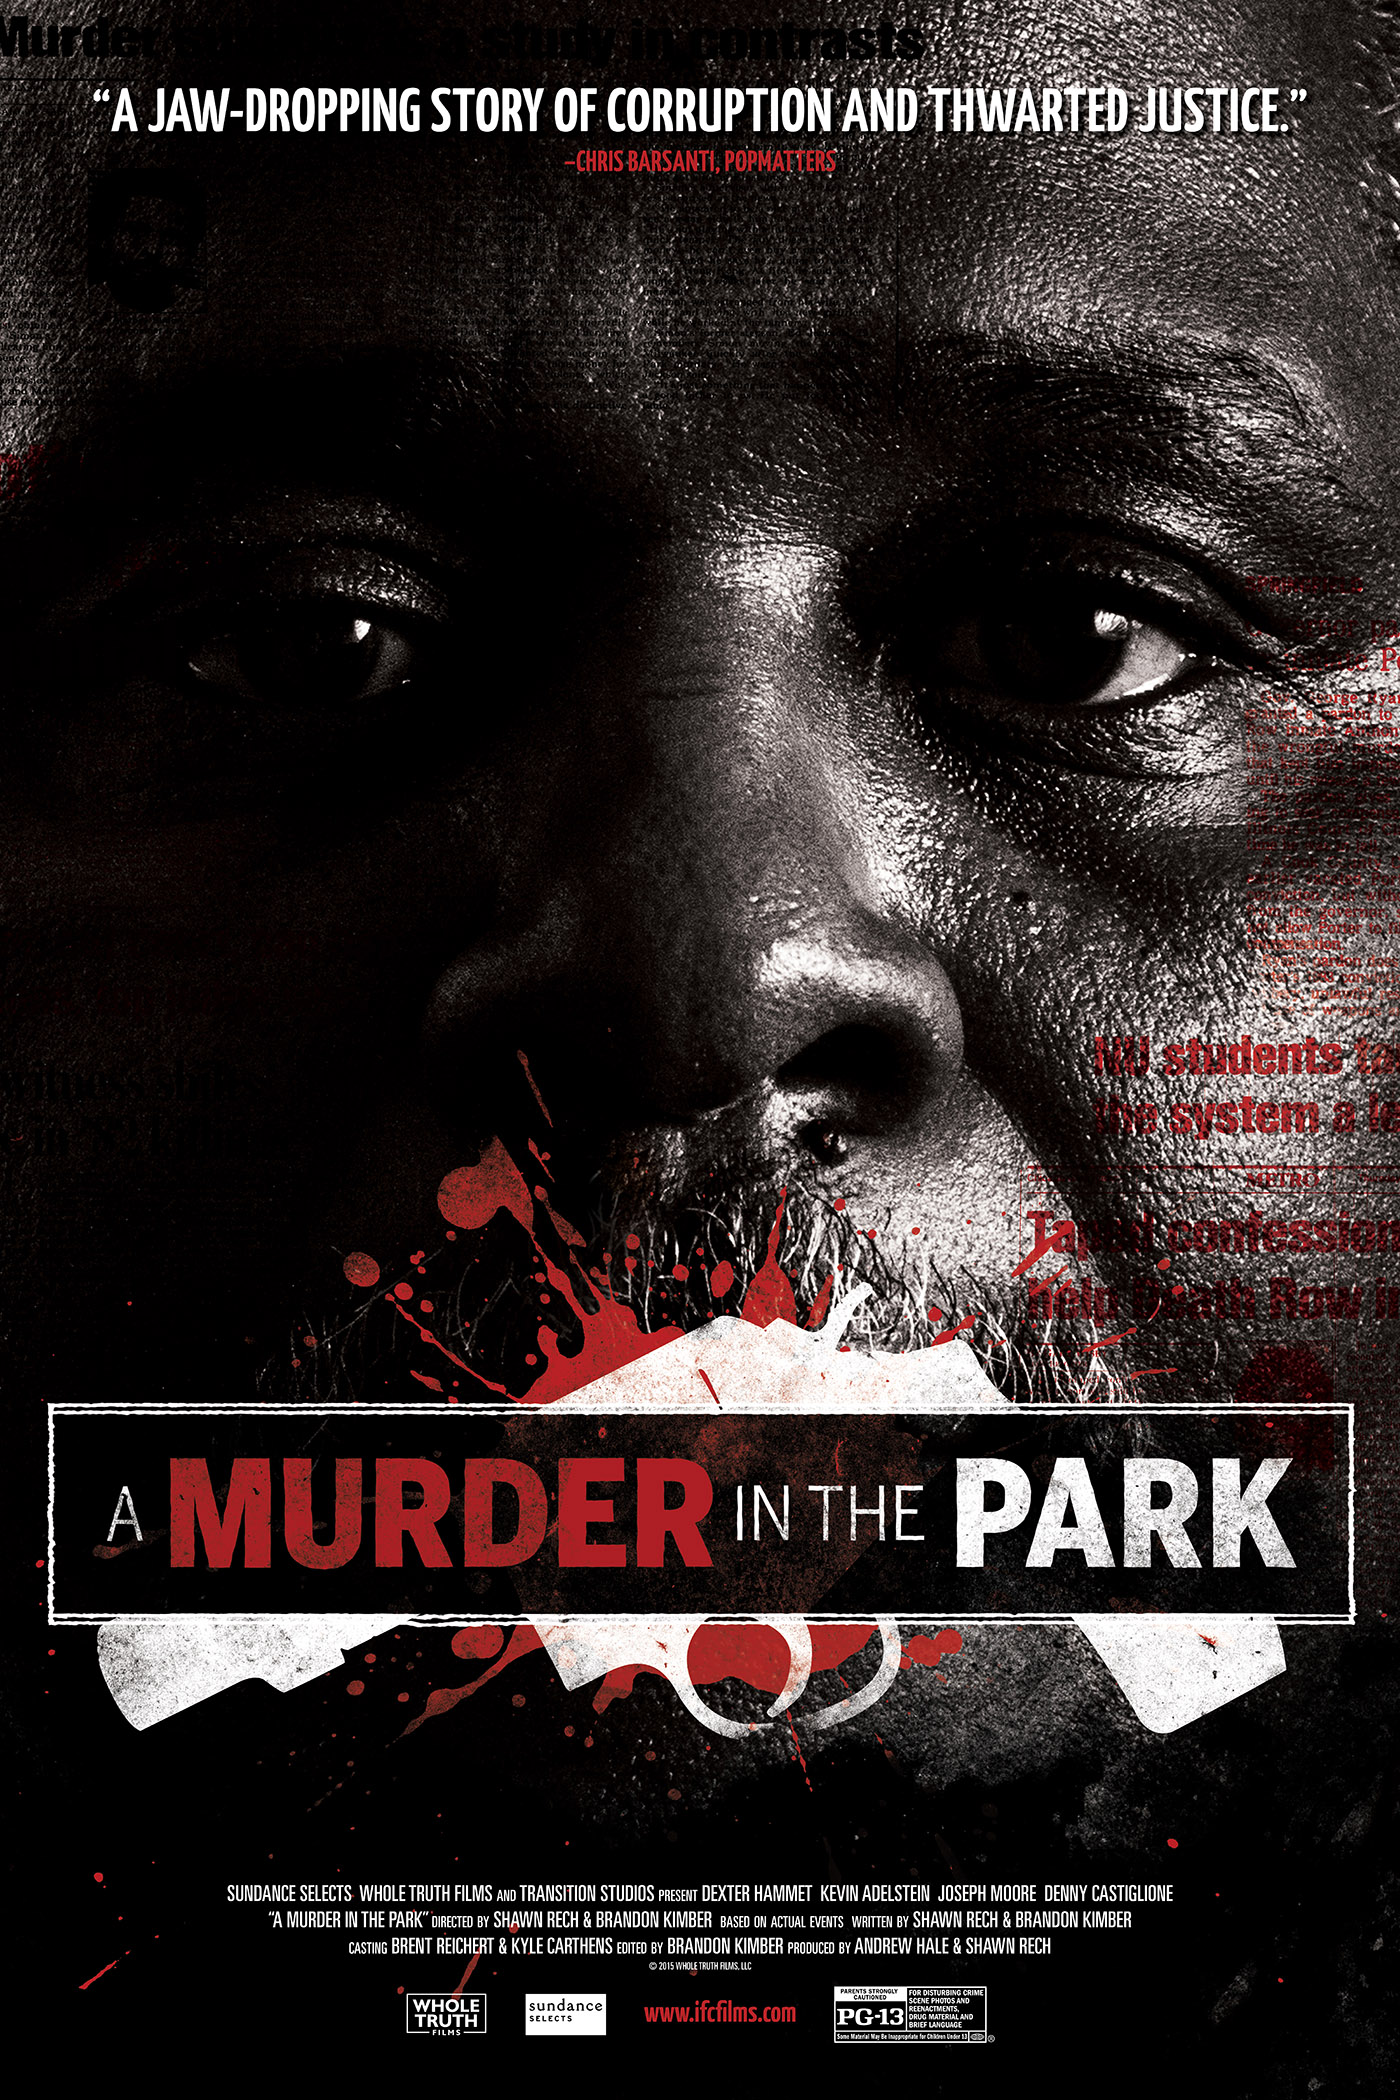 Jacob Lowe starred in documentary A murder in the park